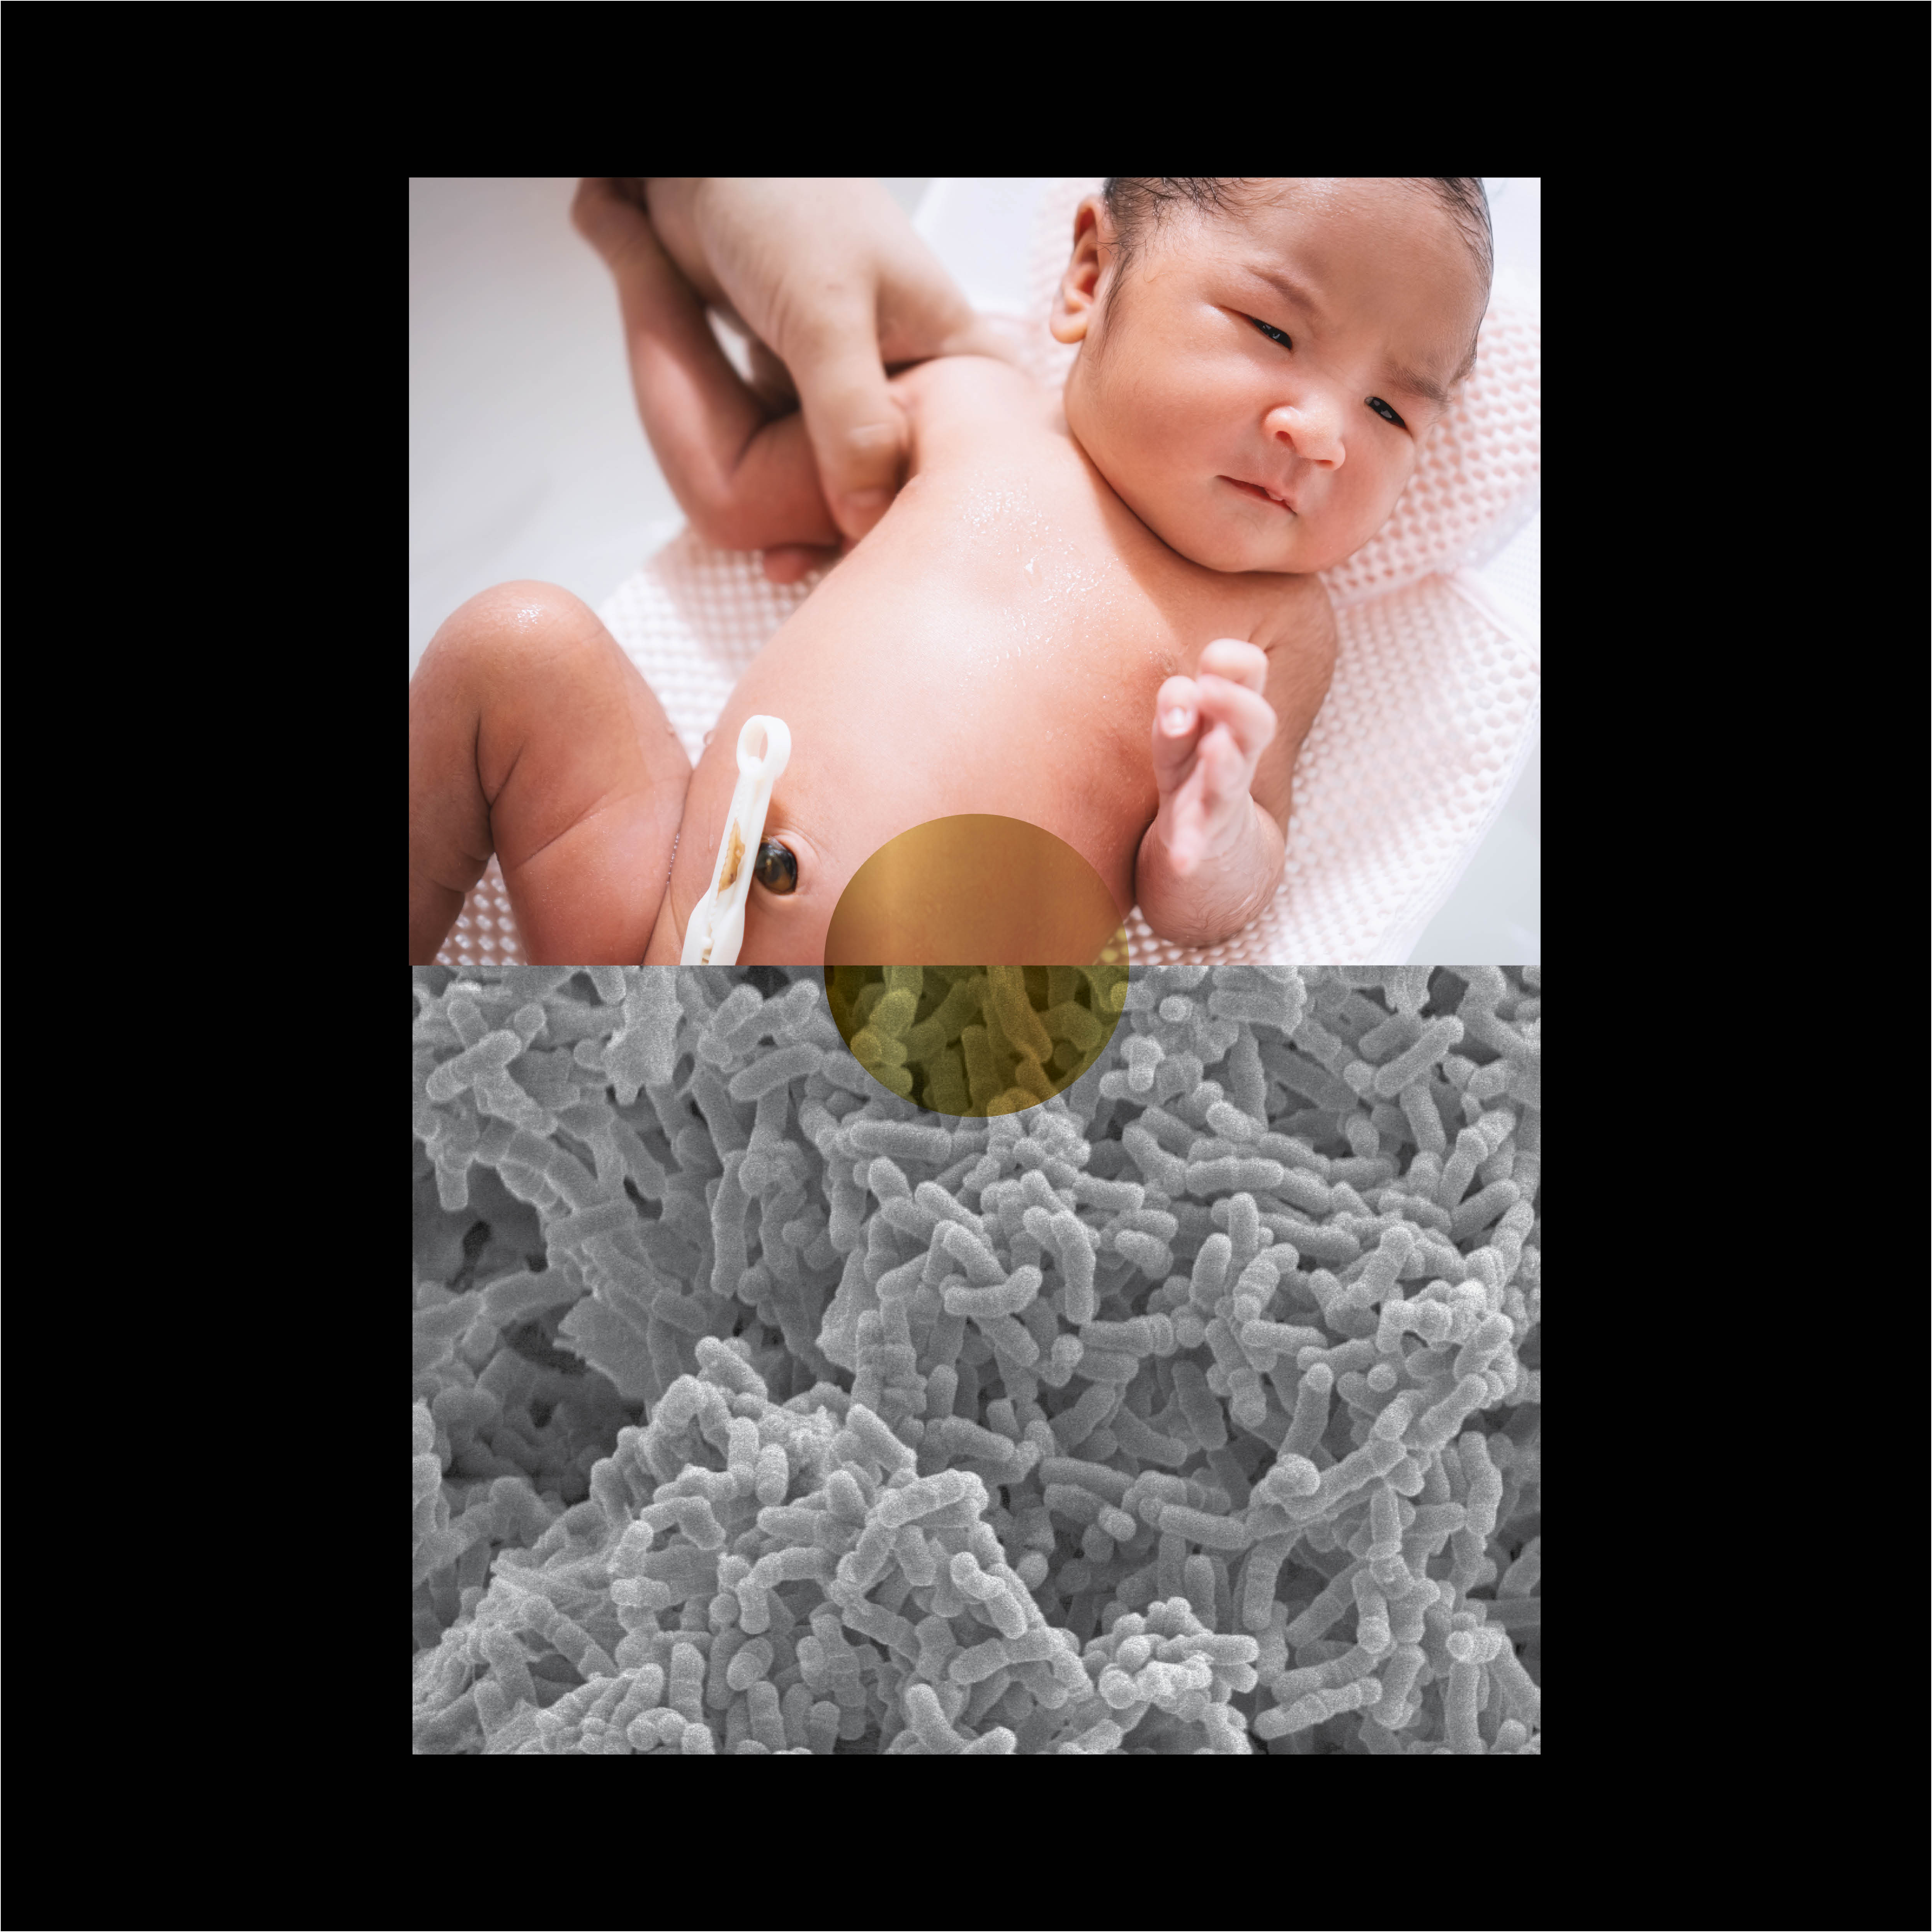 Baby with umbilical cord and bacteria collage